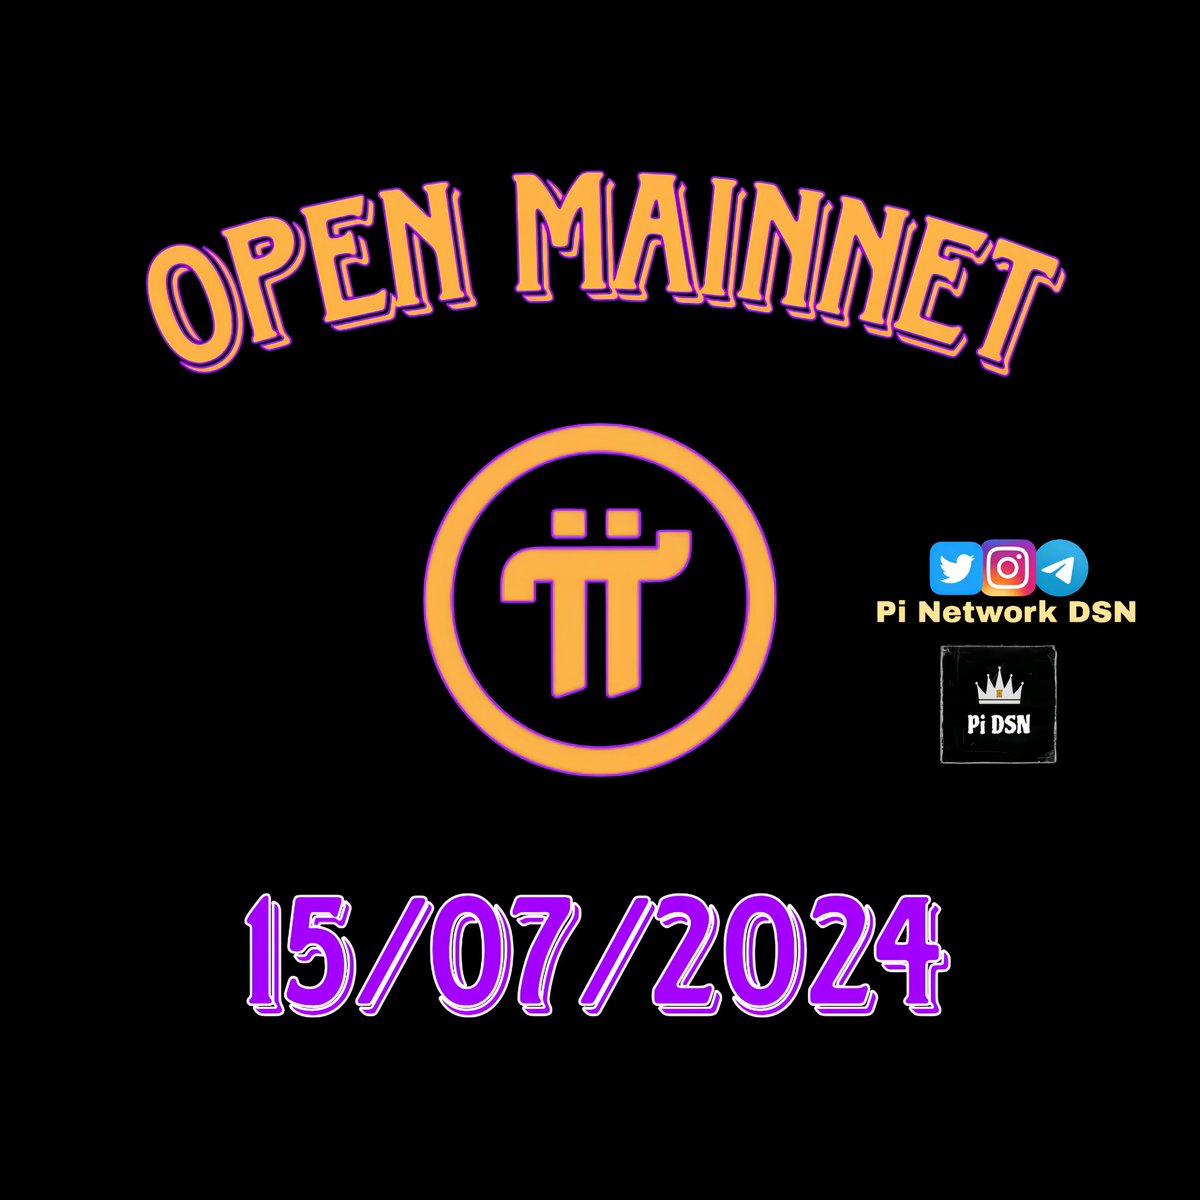 I think that the announcement of the date of opening the network will be on 06/28/2024, and the open mainnet will be, as we think, on 07/15/2024.
@PiCoreTeam @Pi_diange @dorisyincpa @cryptoleakvn @CryptoPi0neers @PiNewsMedia 
#PiDay #PiNetwork #PiCoin #web3  #pi2day #Openmainnet